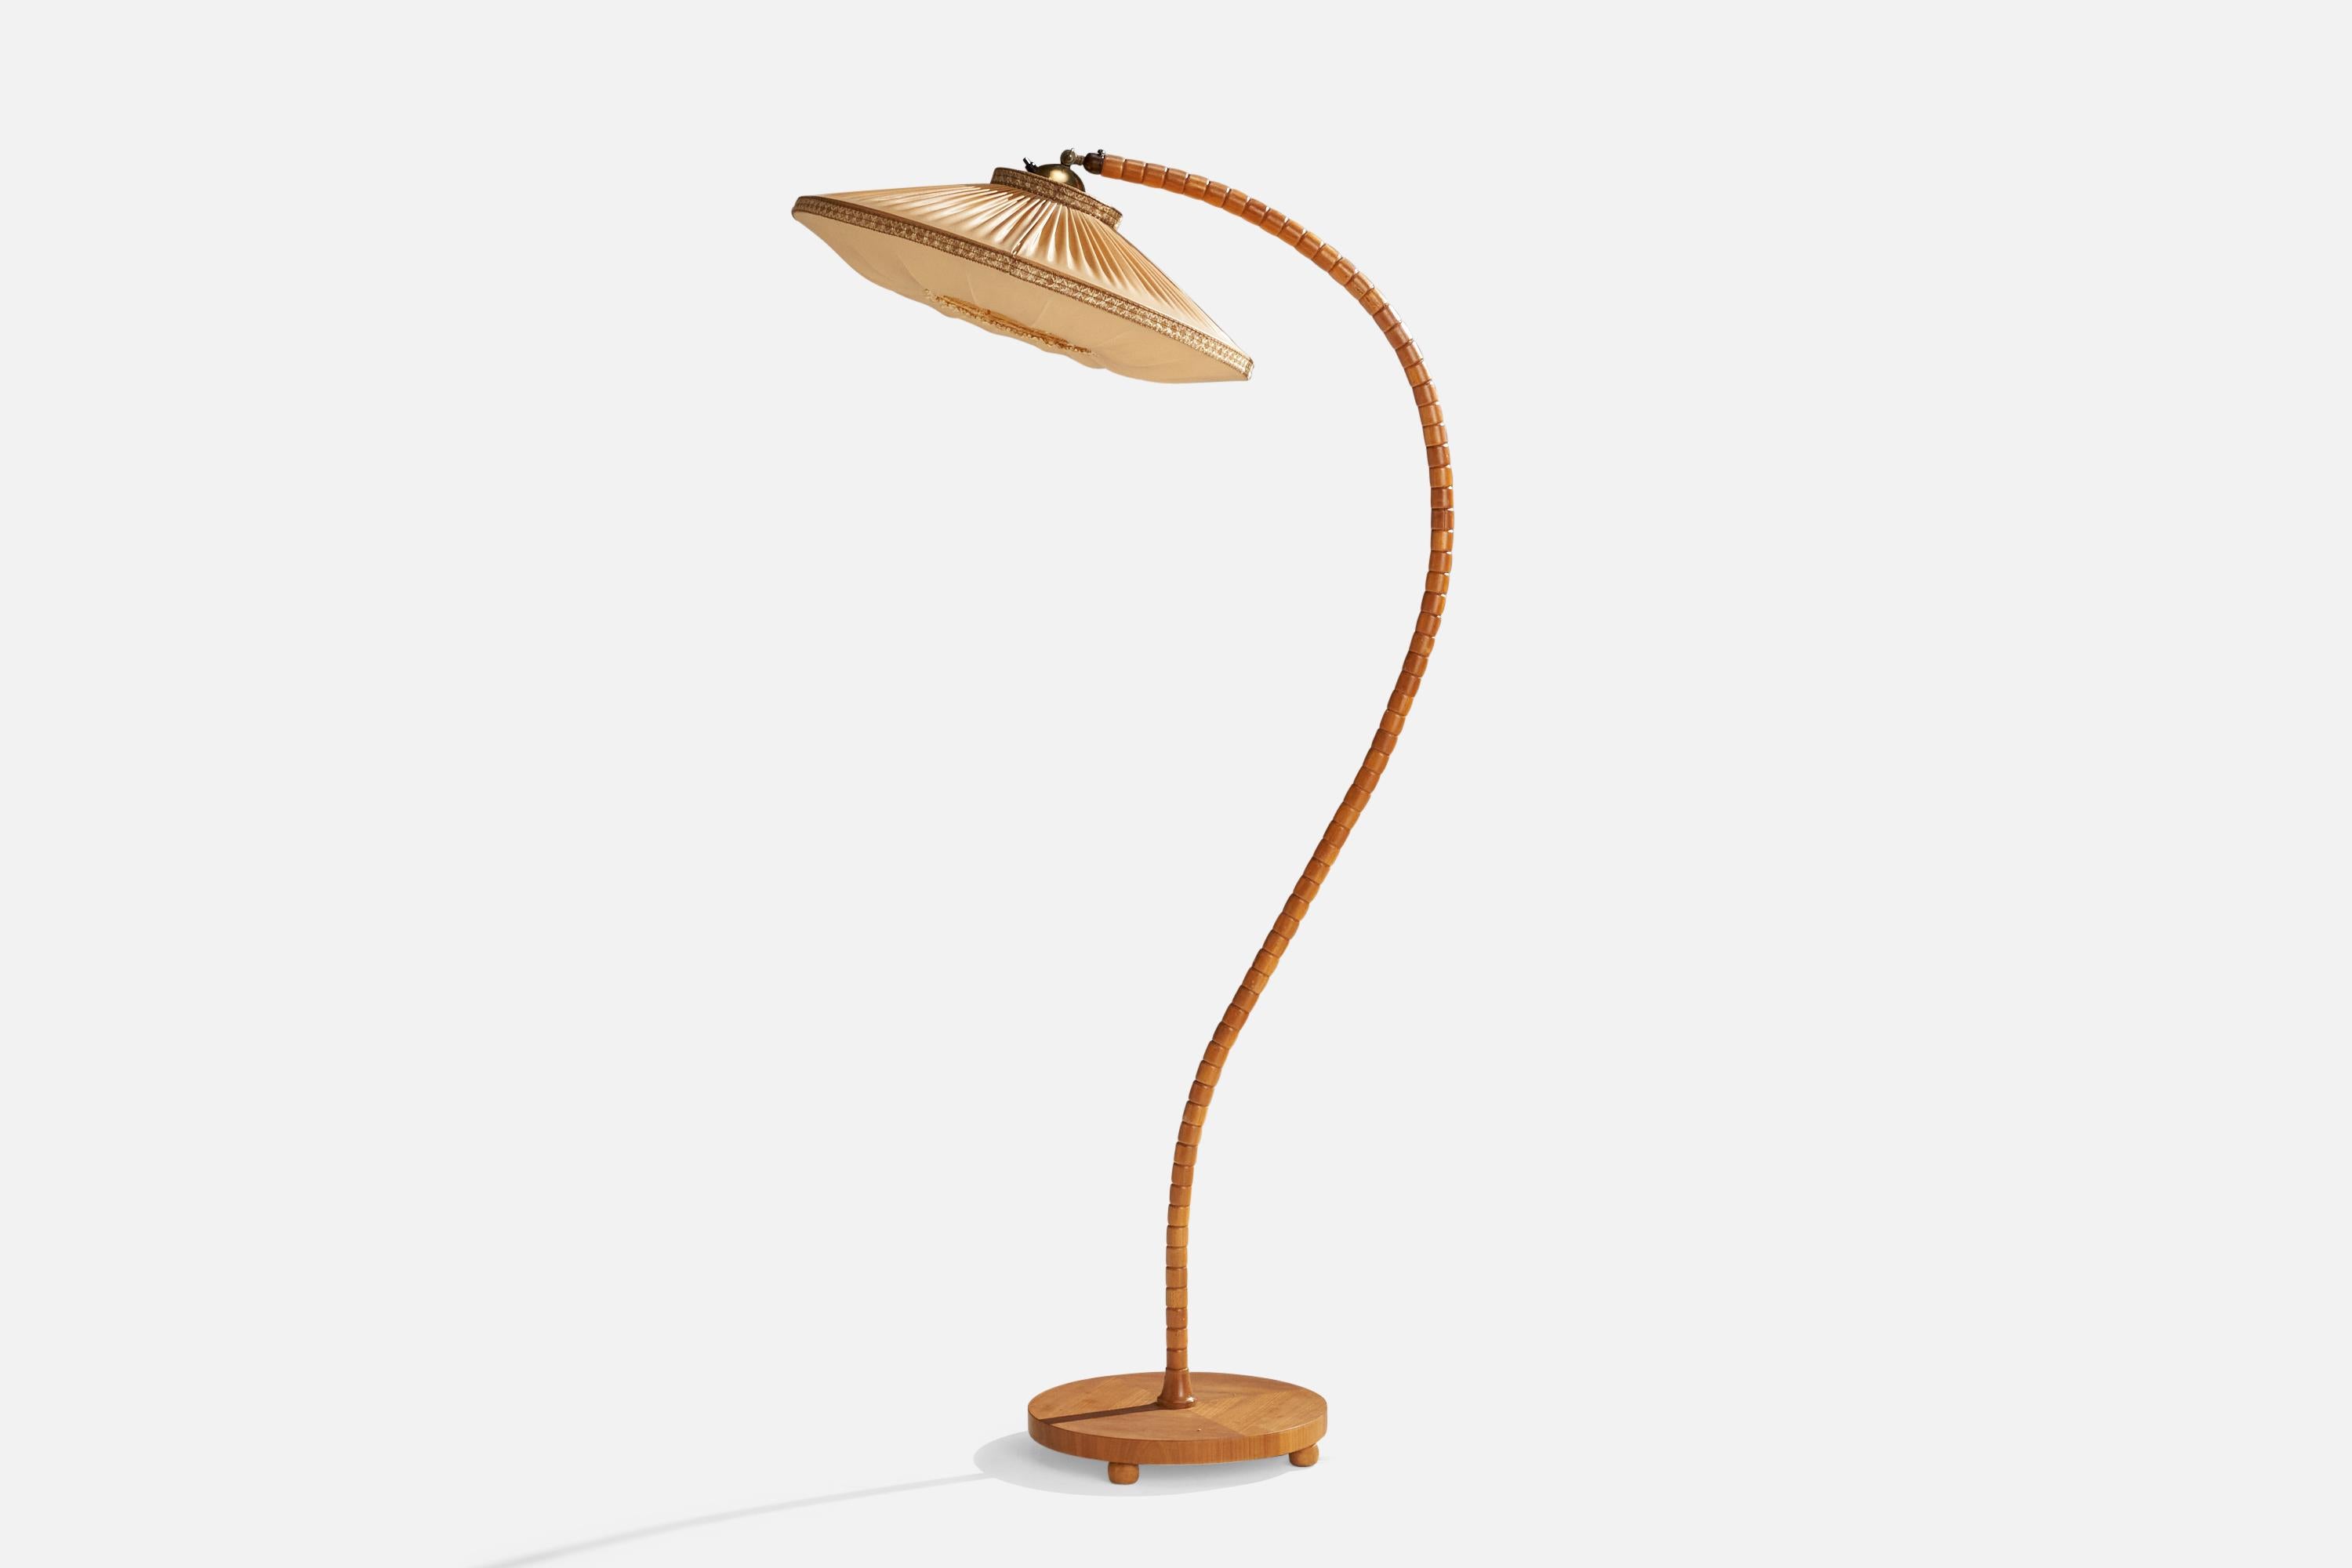 An oak, brass and beige fabric floor lamp designed and produced in Sweden, 1940s.

Overall Dimensions (inches): 59” H x 21.5” W x 28”  D
Stated dimensions include shade.
Bulb Specifications: E-26 Bulb
Number of Sockets: 1
All lighting will be